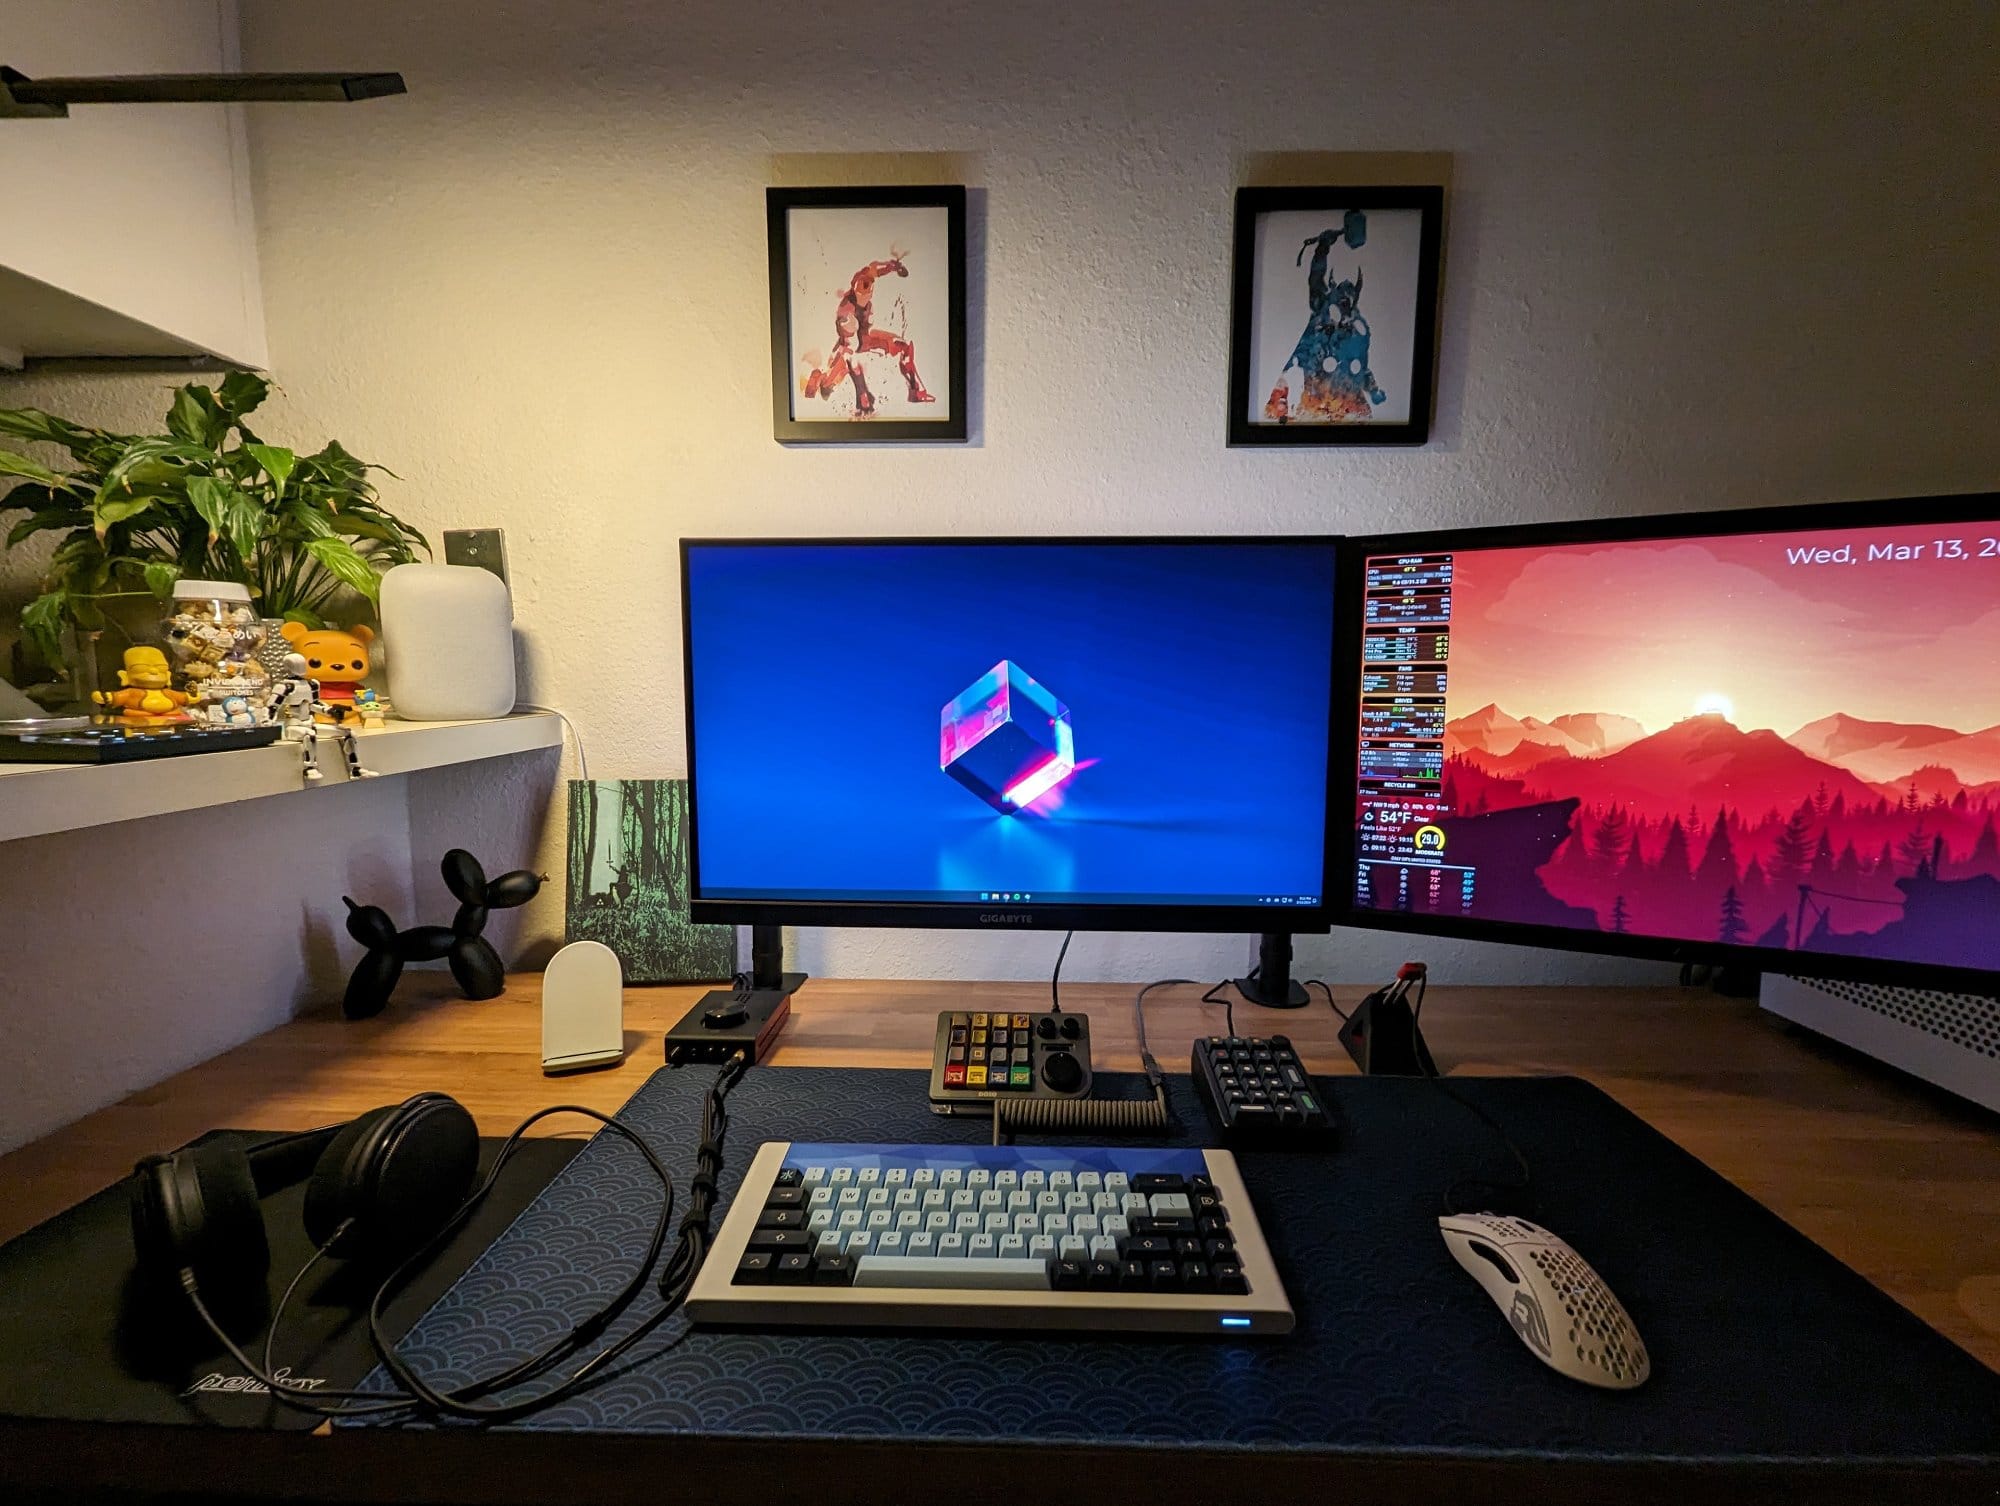 An evening view of a desk with a mechanical keyboard, a pair of headphones, dual monitors, and a collection of figurines and plants on the shelf above